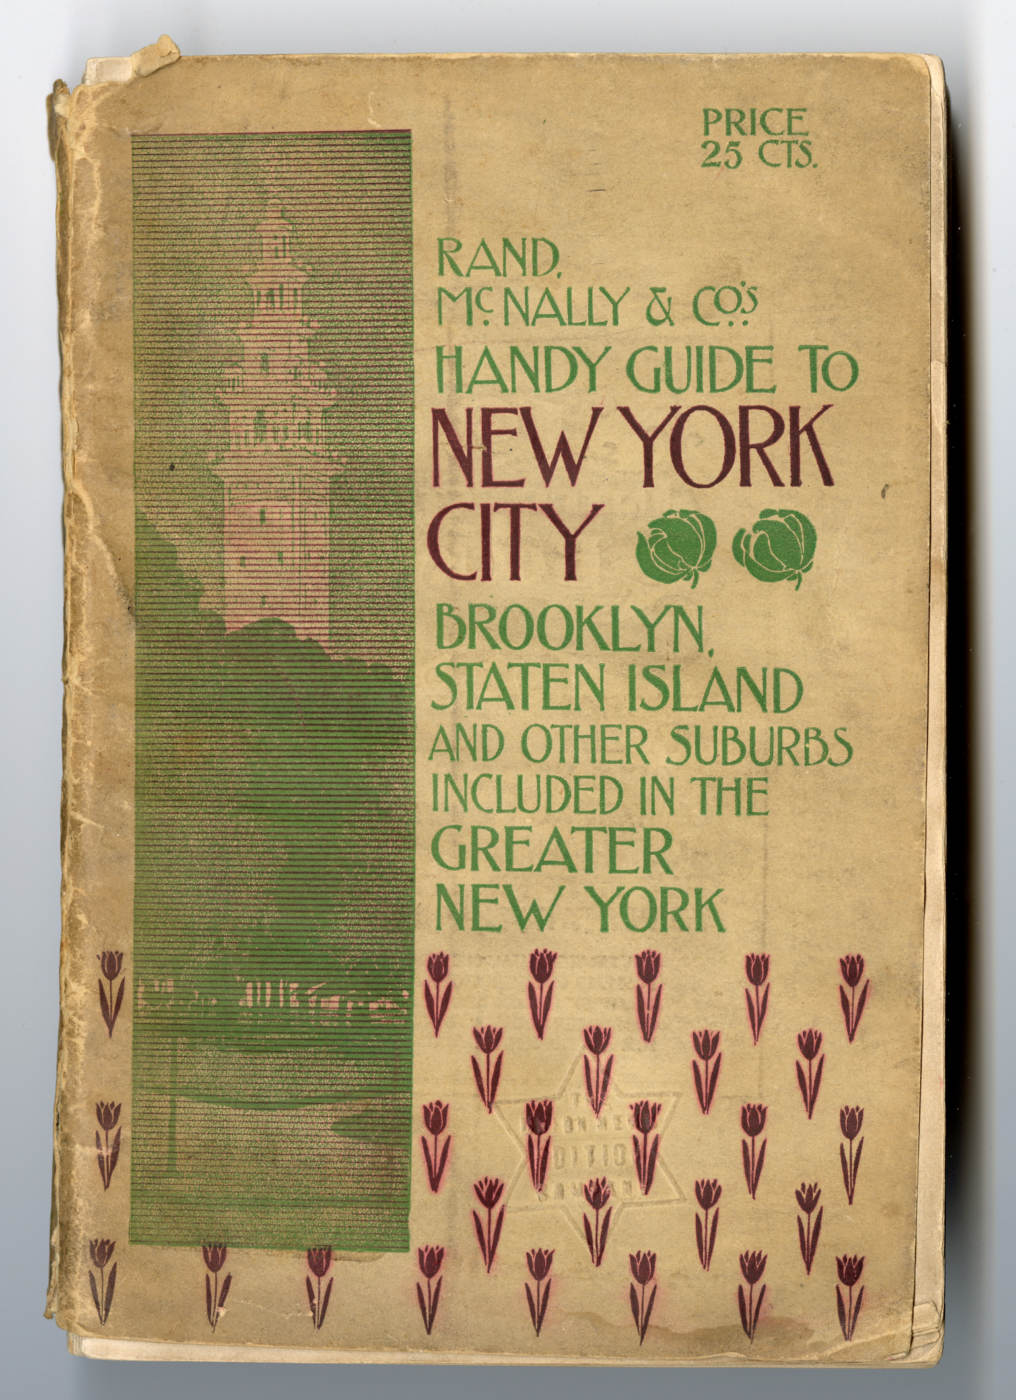 Cover of the Rand McNally & Company's Handy Guide to New York City: Brooklyn, Staten Island and other suburbs included in the Greater New York (probably includes Queens, maybe). Courtesy of Roy Delbyck. Museum of Chinese in America (MOCA) Collection.